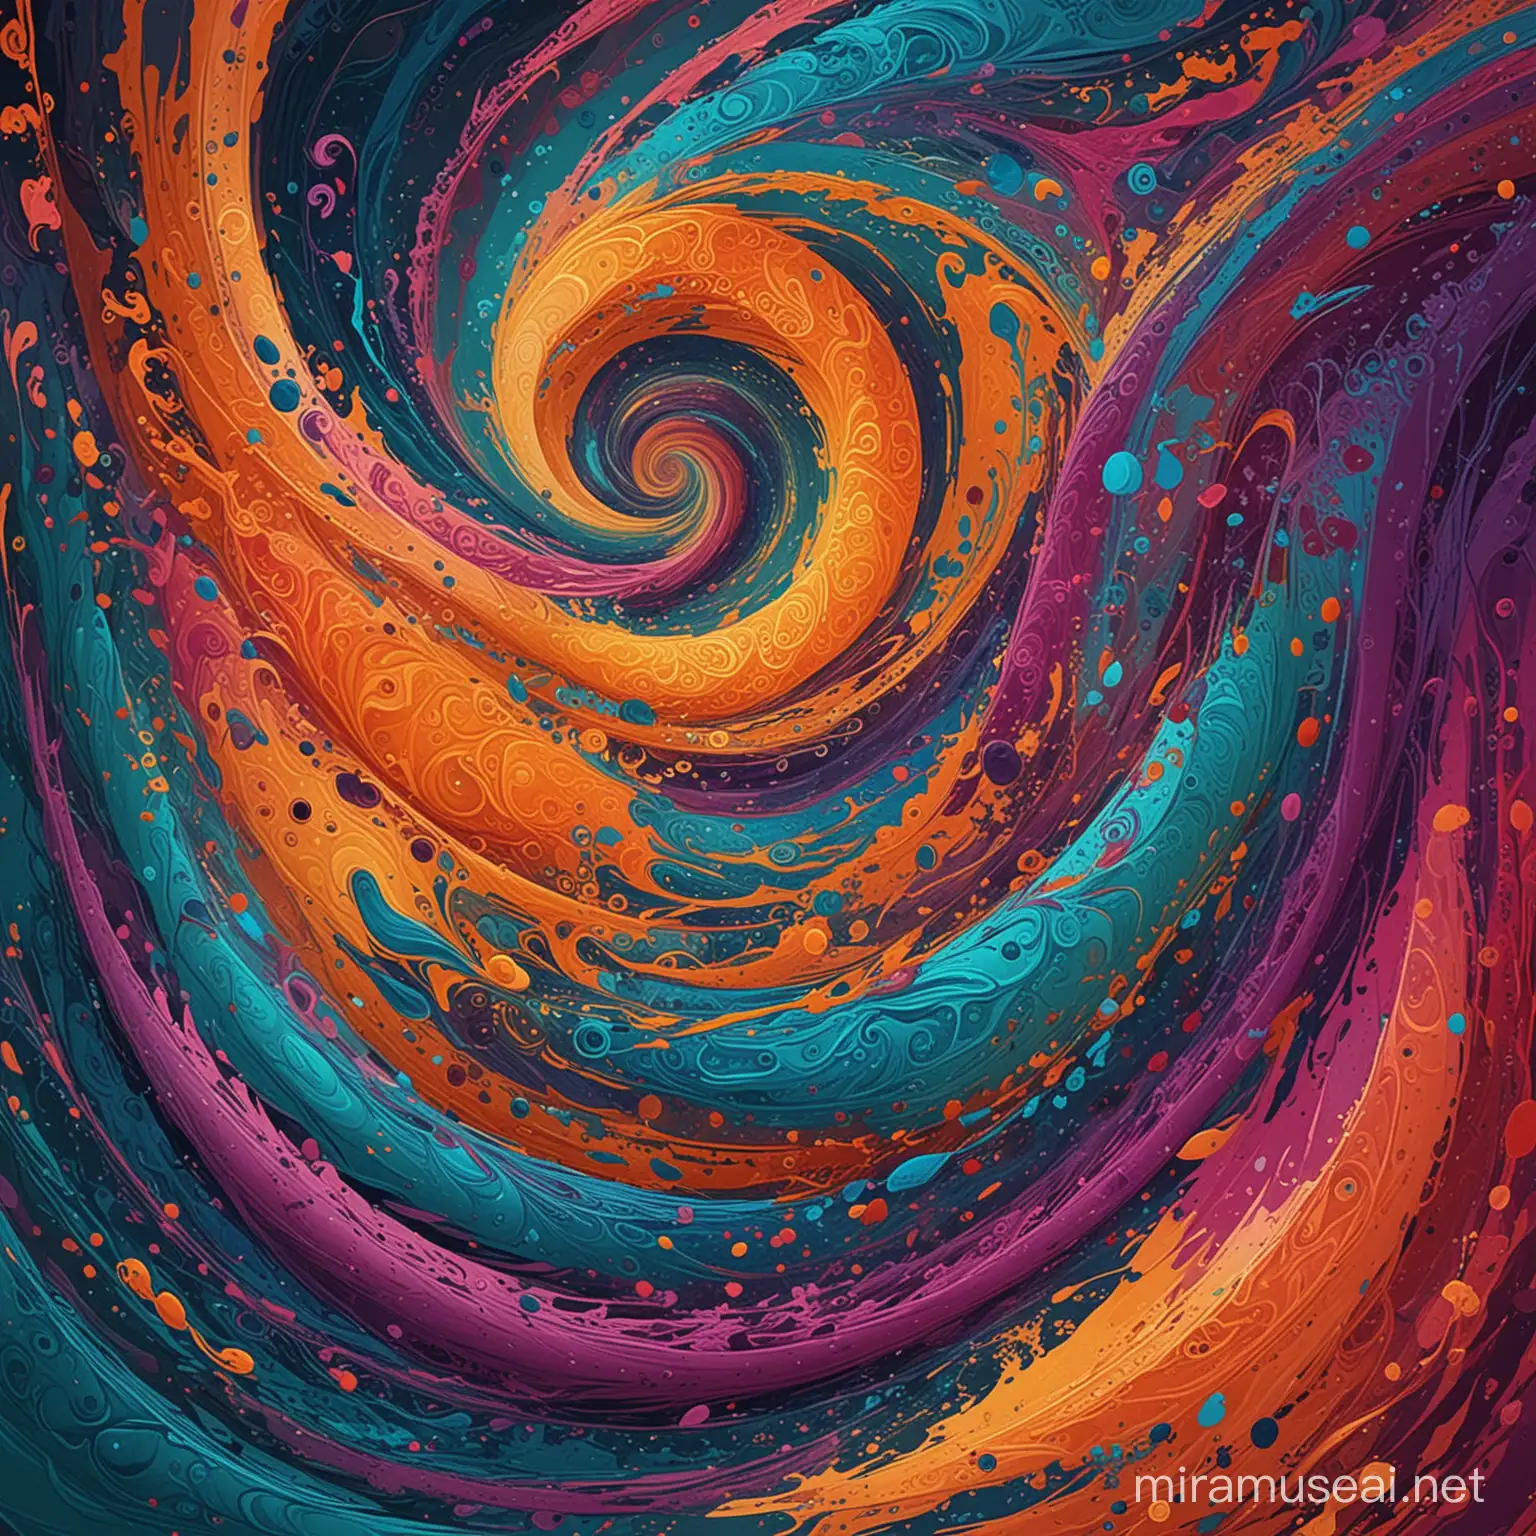 Abstract Digital Painting of Swirling Organic Shapes and Bright Colors